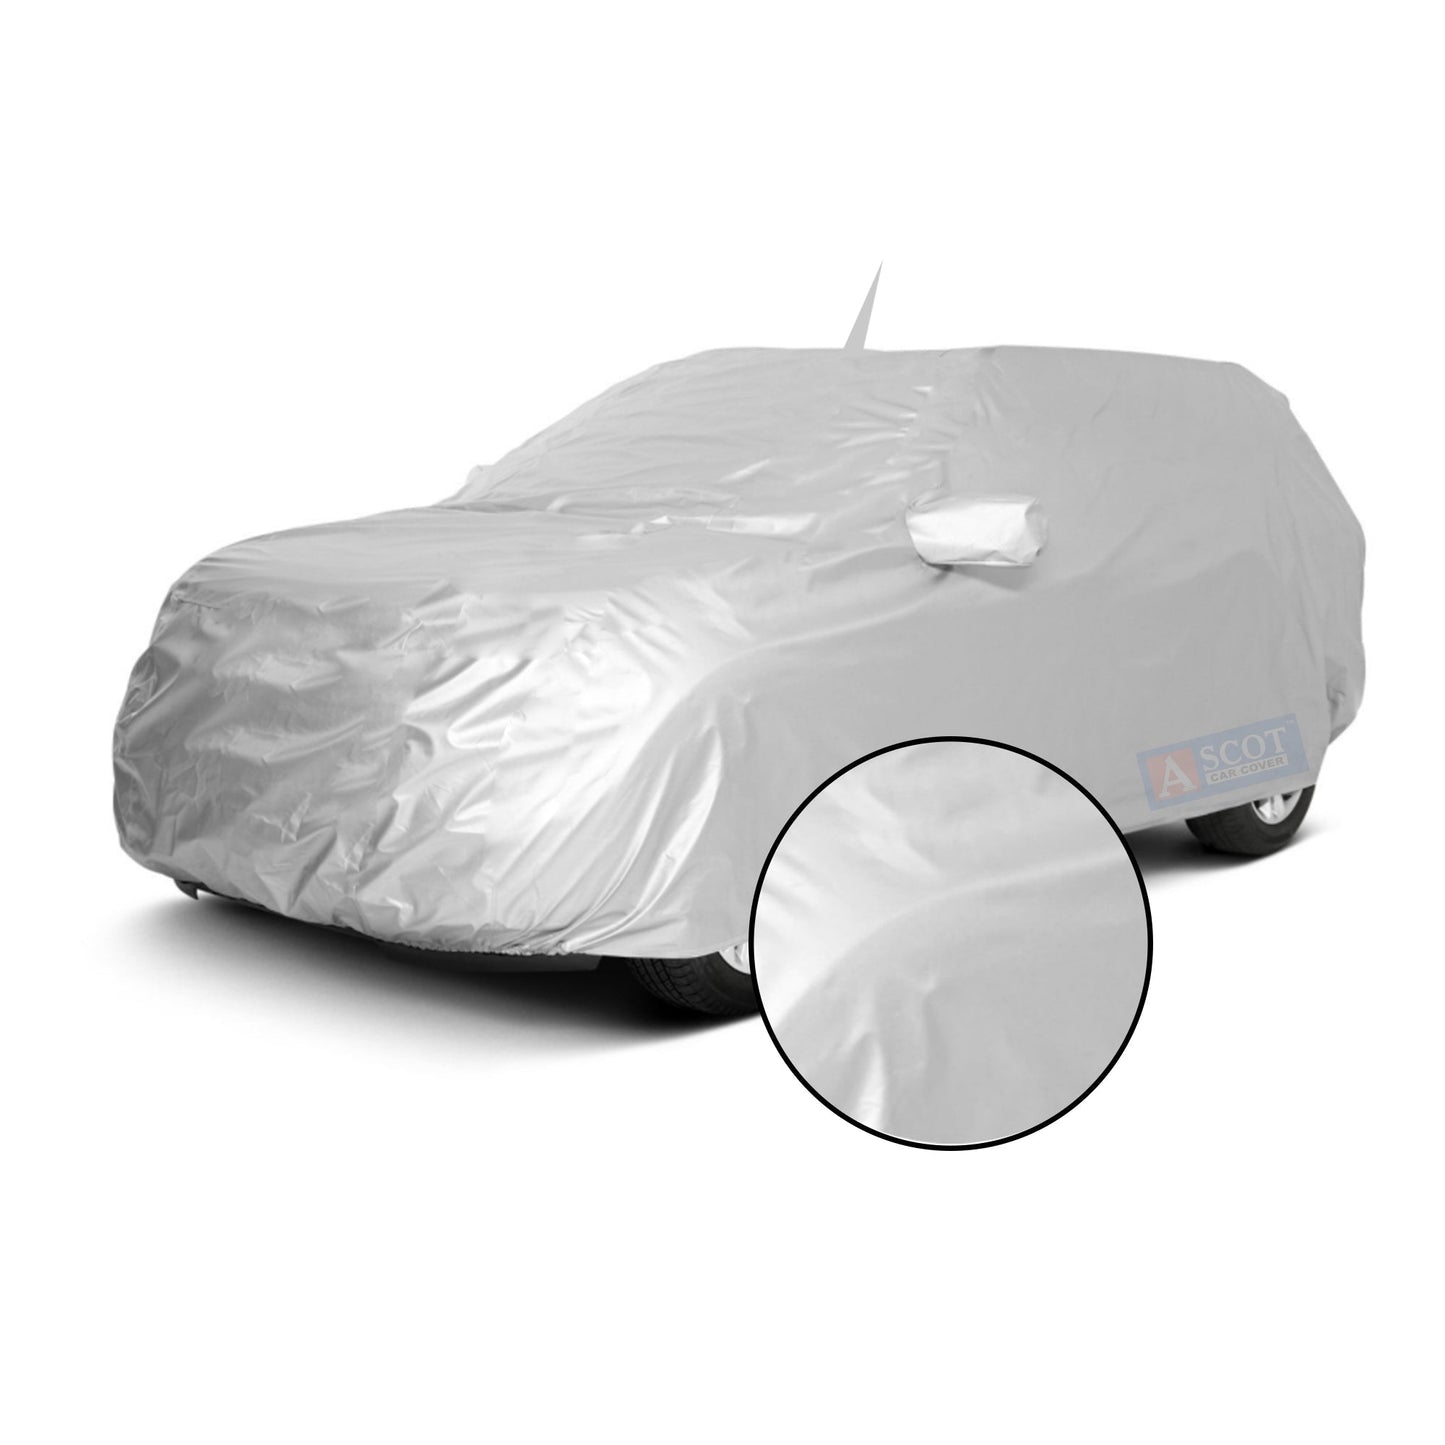 Ascot Ford Fiesta Car Body Cover Dust Proof, Trippel Stitched